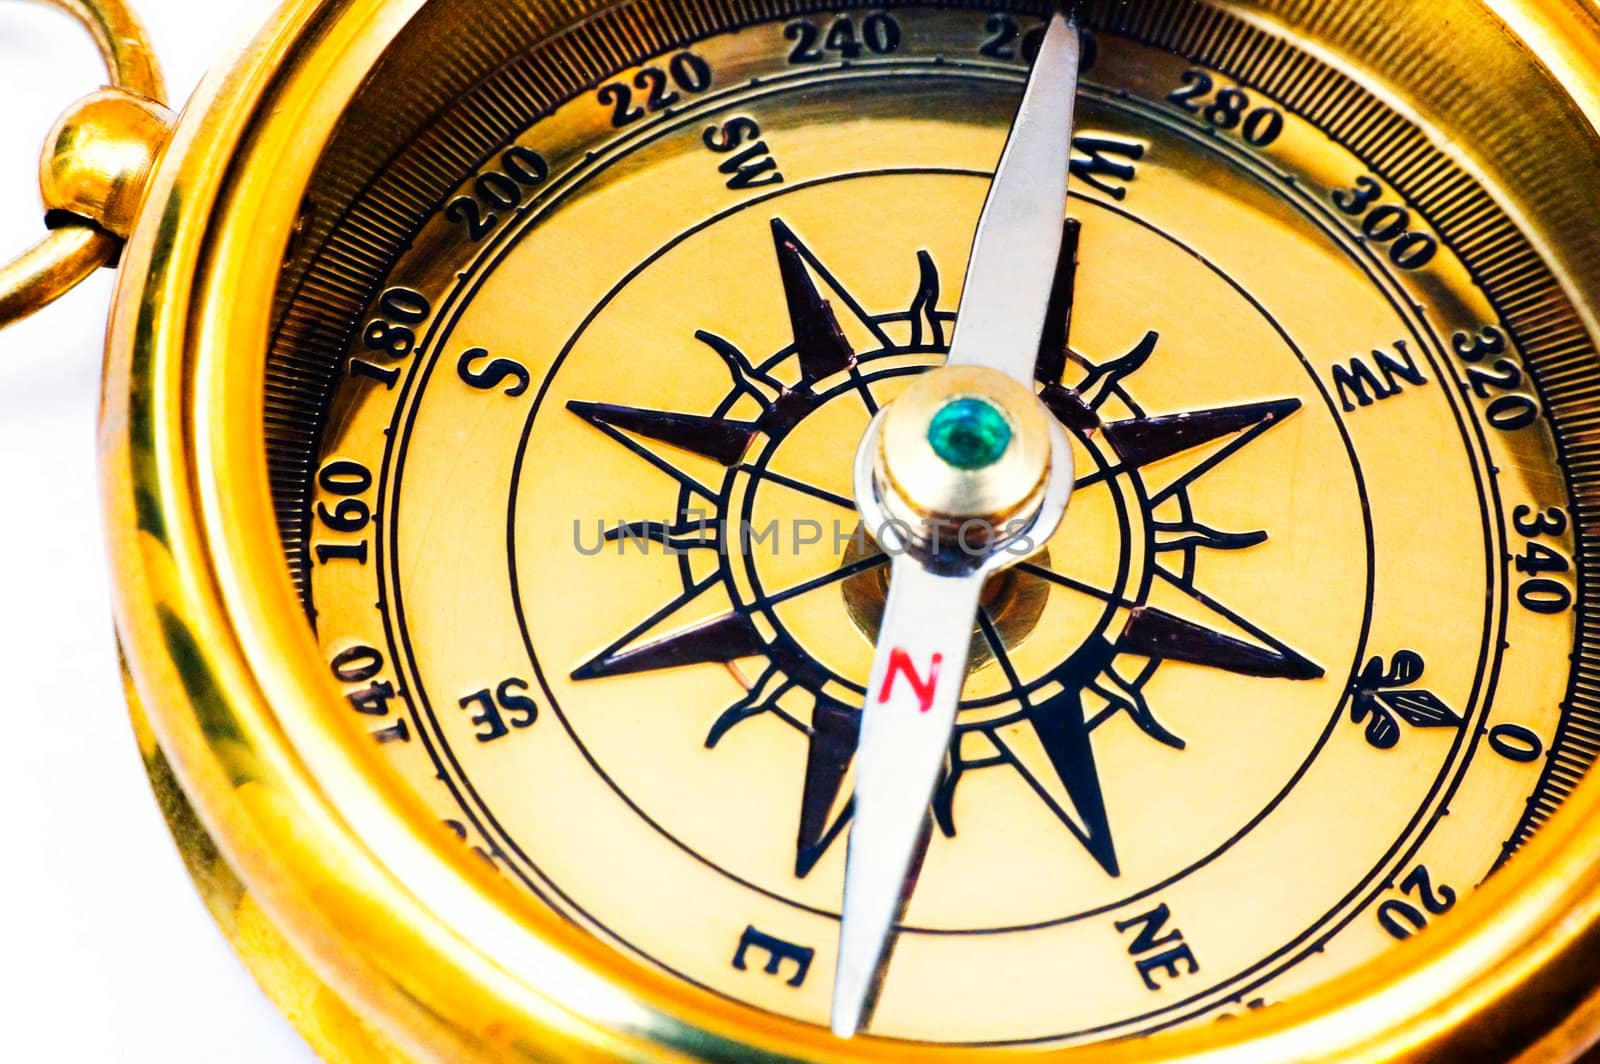 Old style brass compass by haveseen